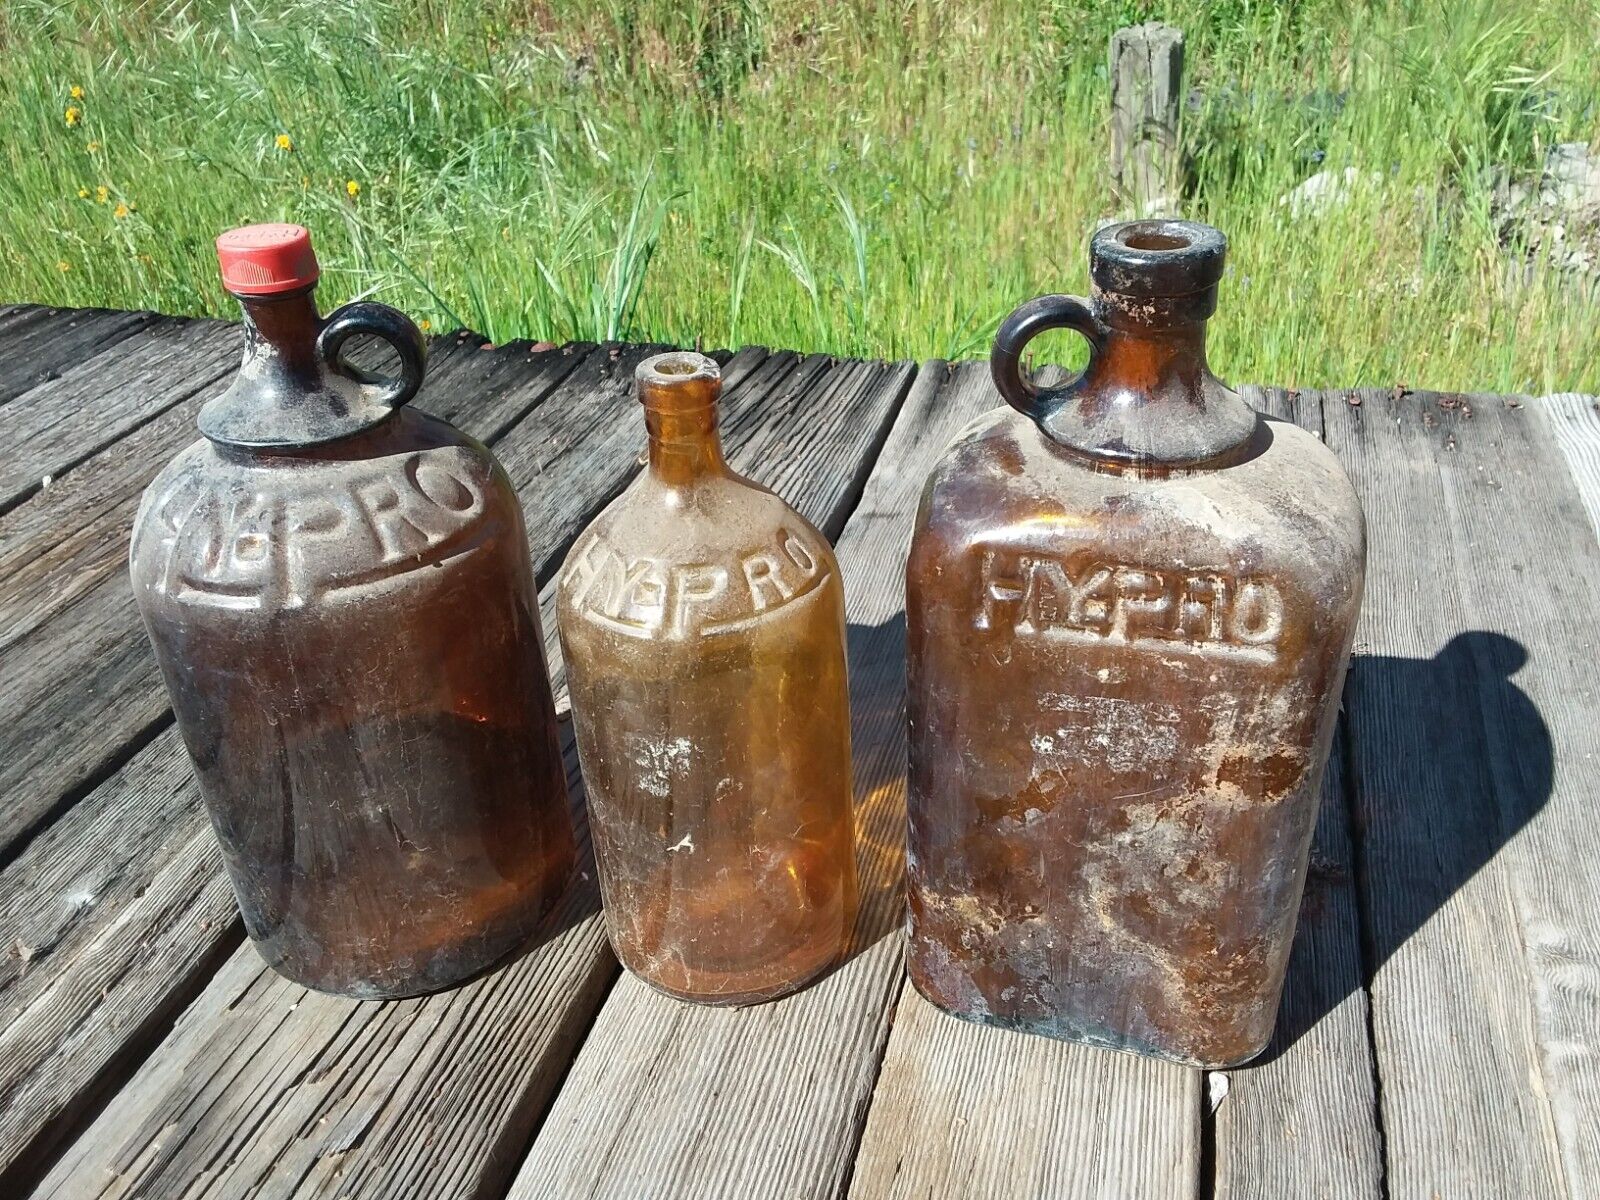 Lot of 3 Vintage Amber/Brown Glass Hy-Pro Bottles Chemical Cleaner Decor Collect